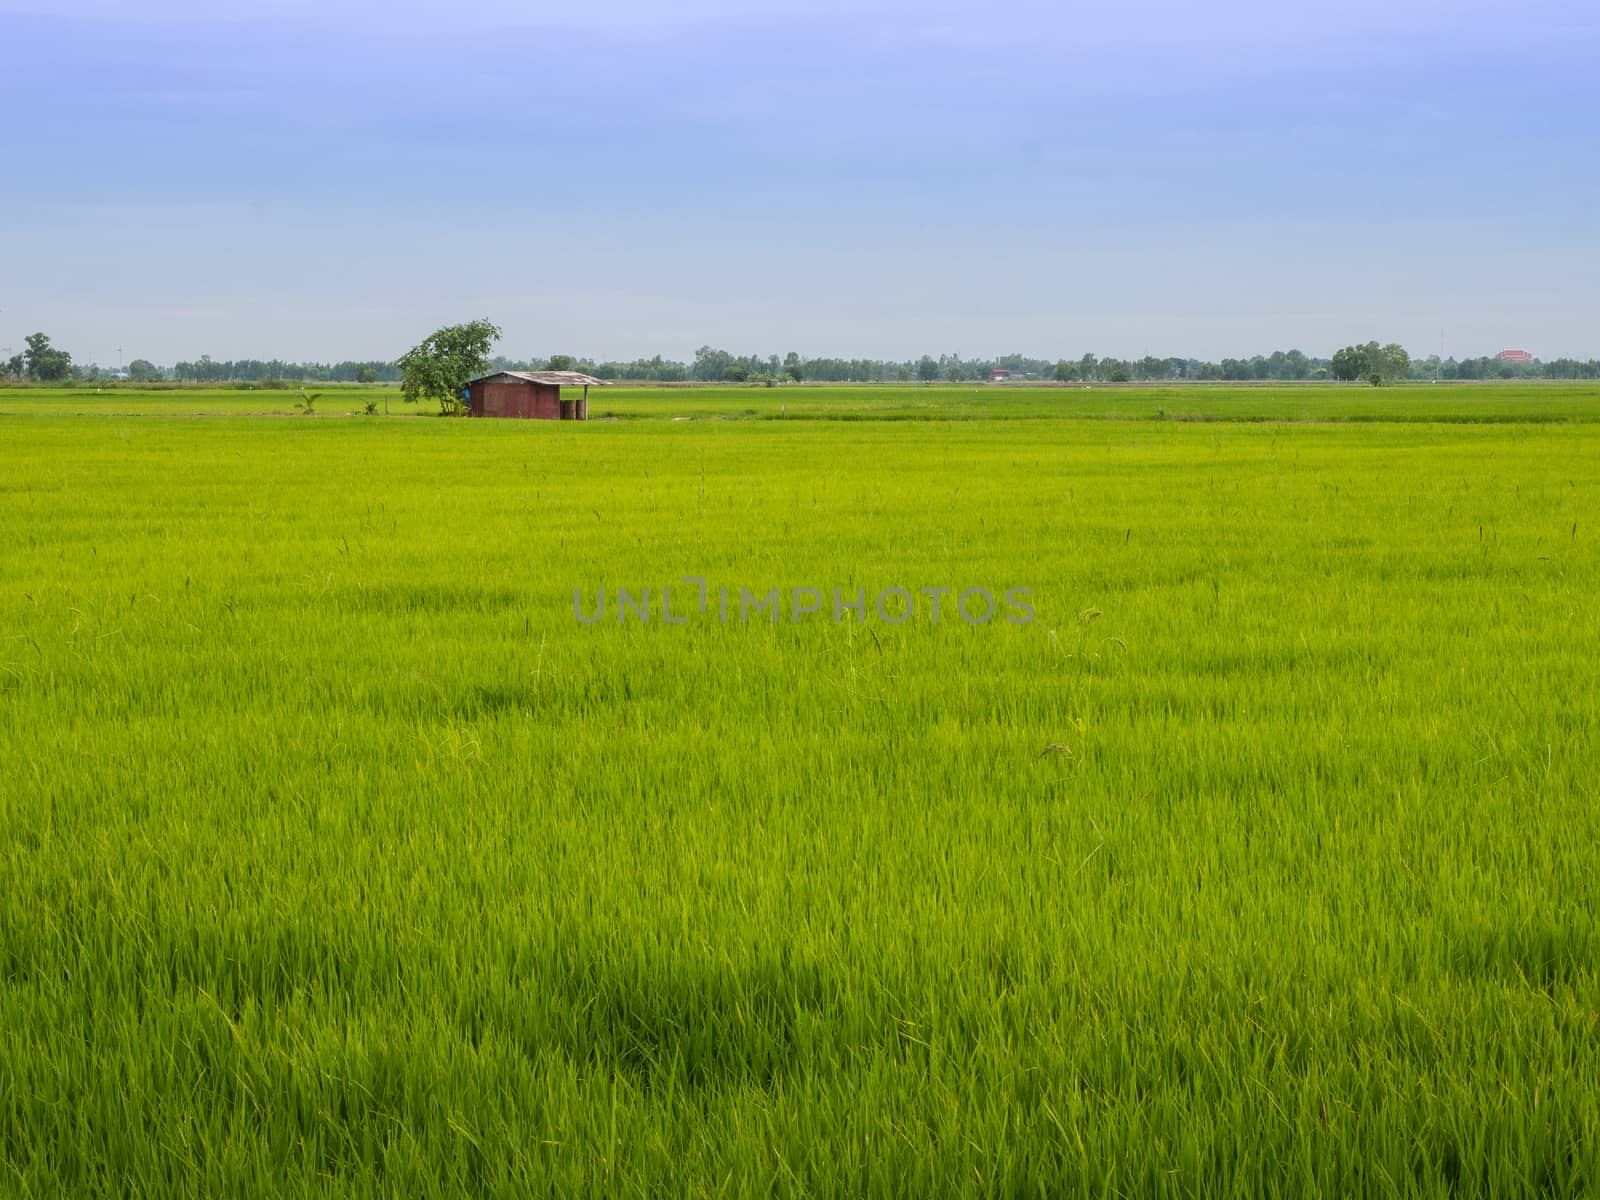 Green rice field with hut